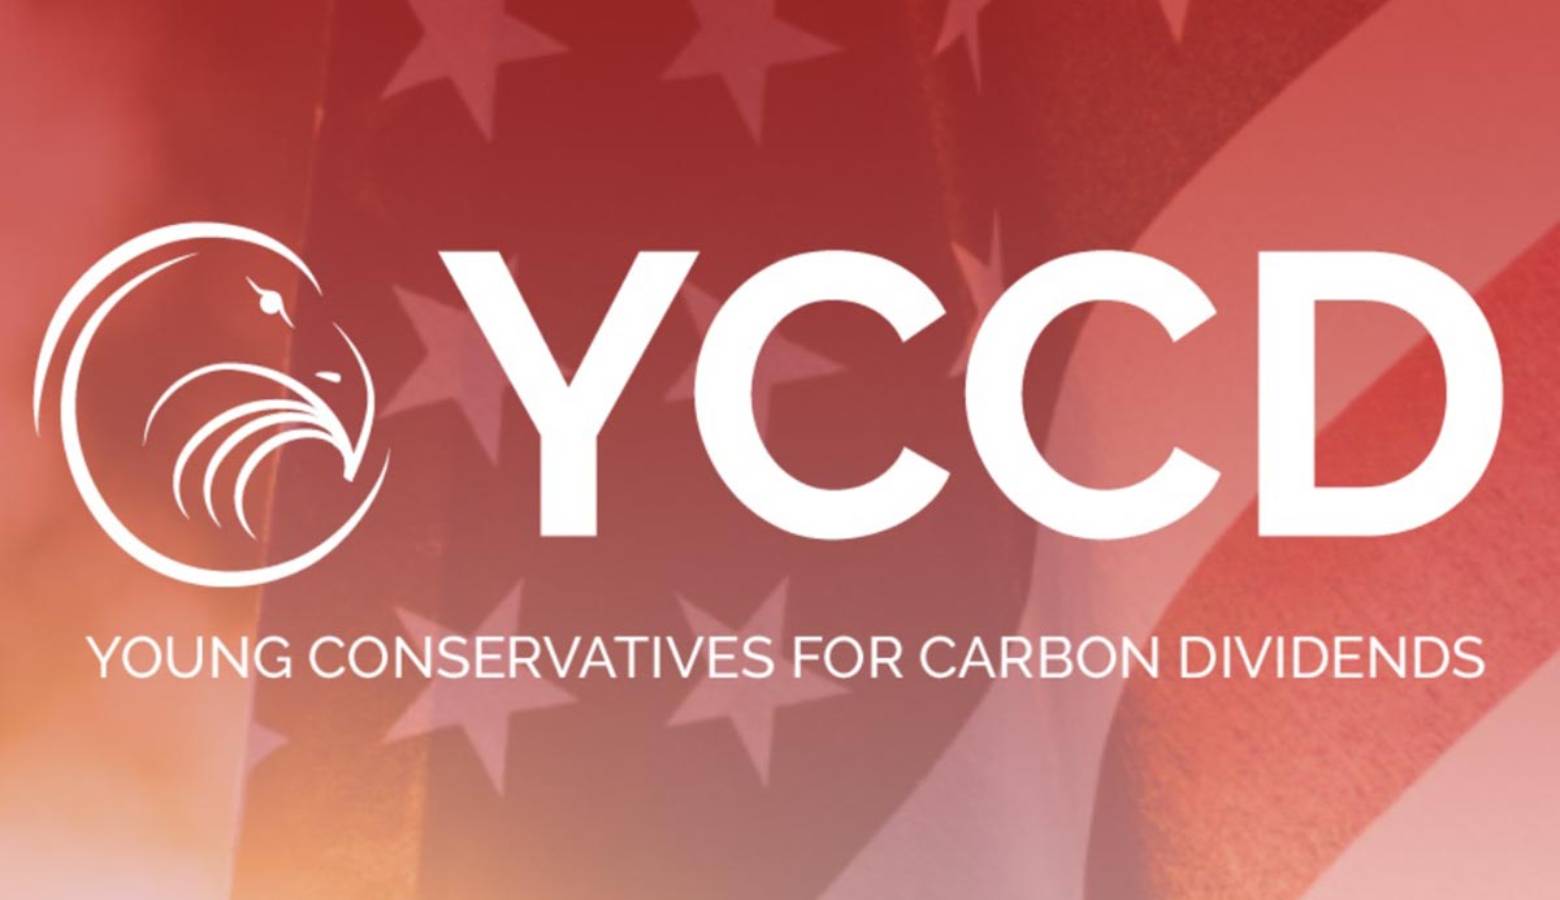 (Courtesy of Young Conservatives for Carbon Dividends)